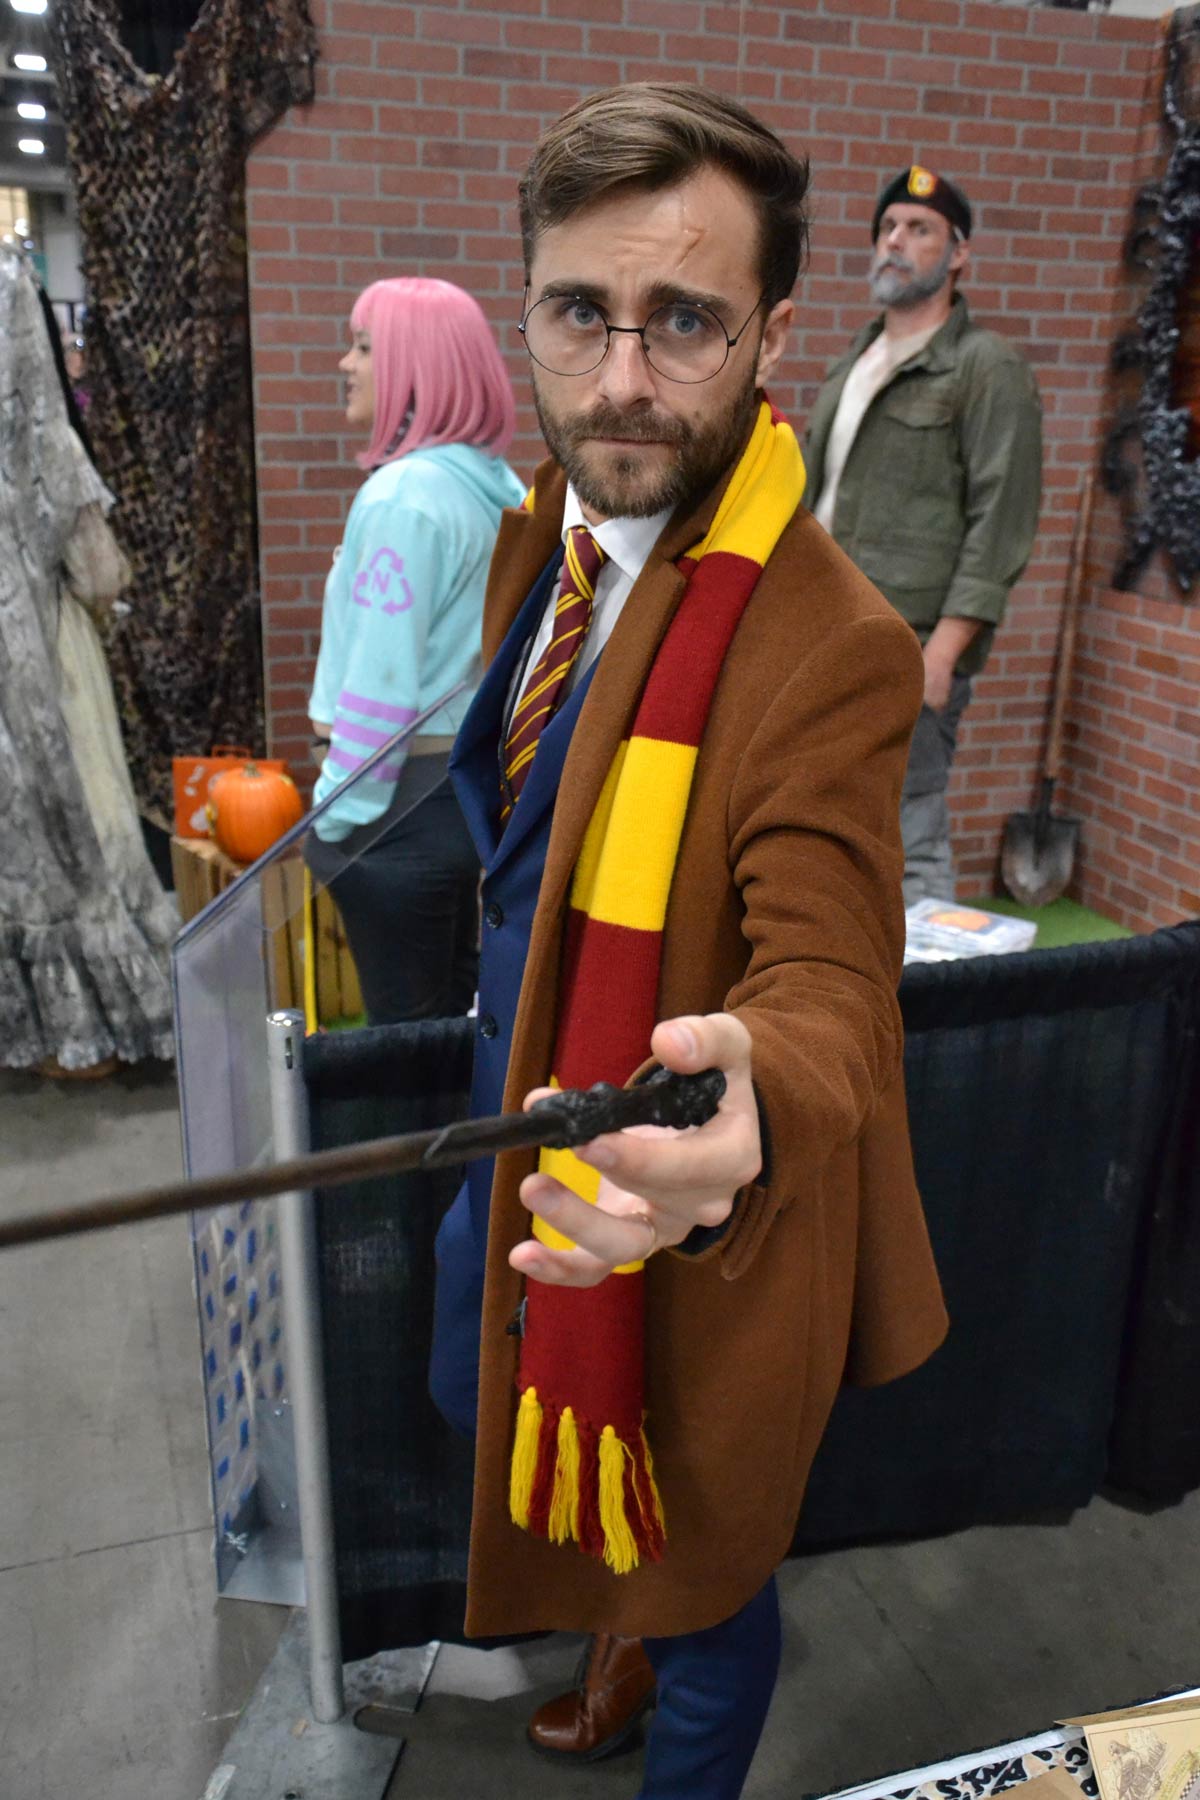 This guy was born to cosplay as Harry Potter